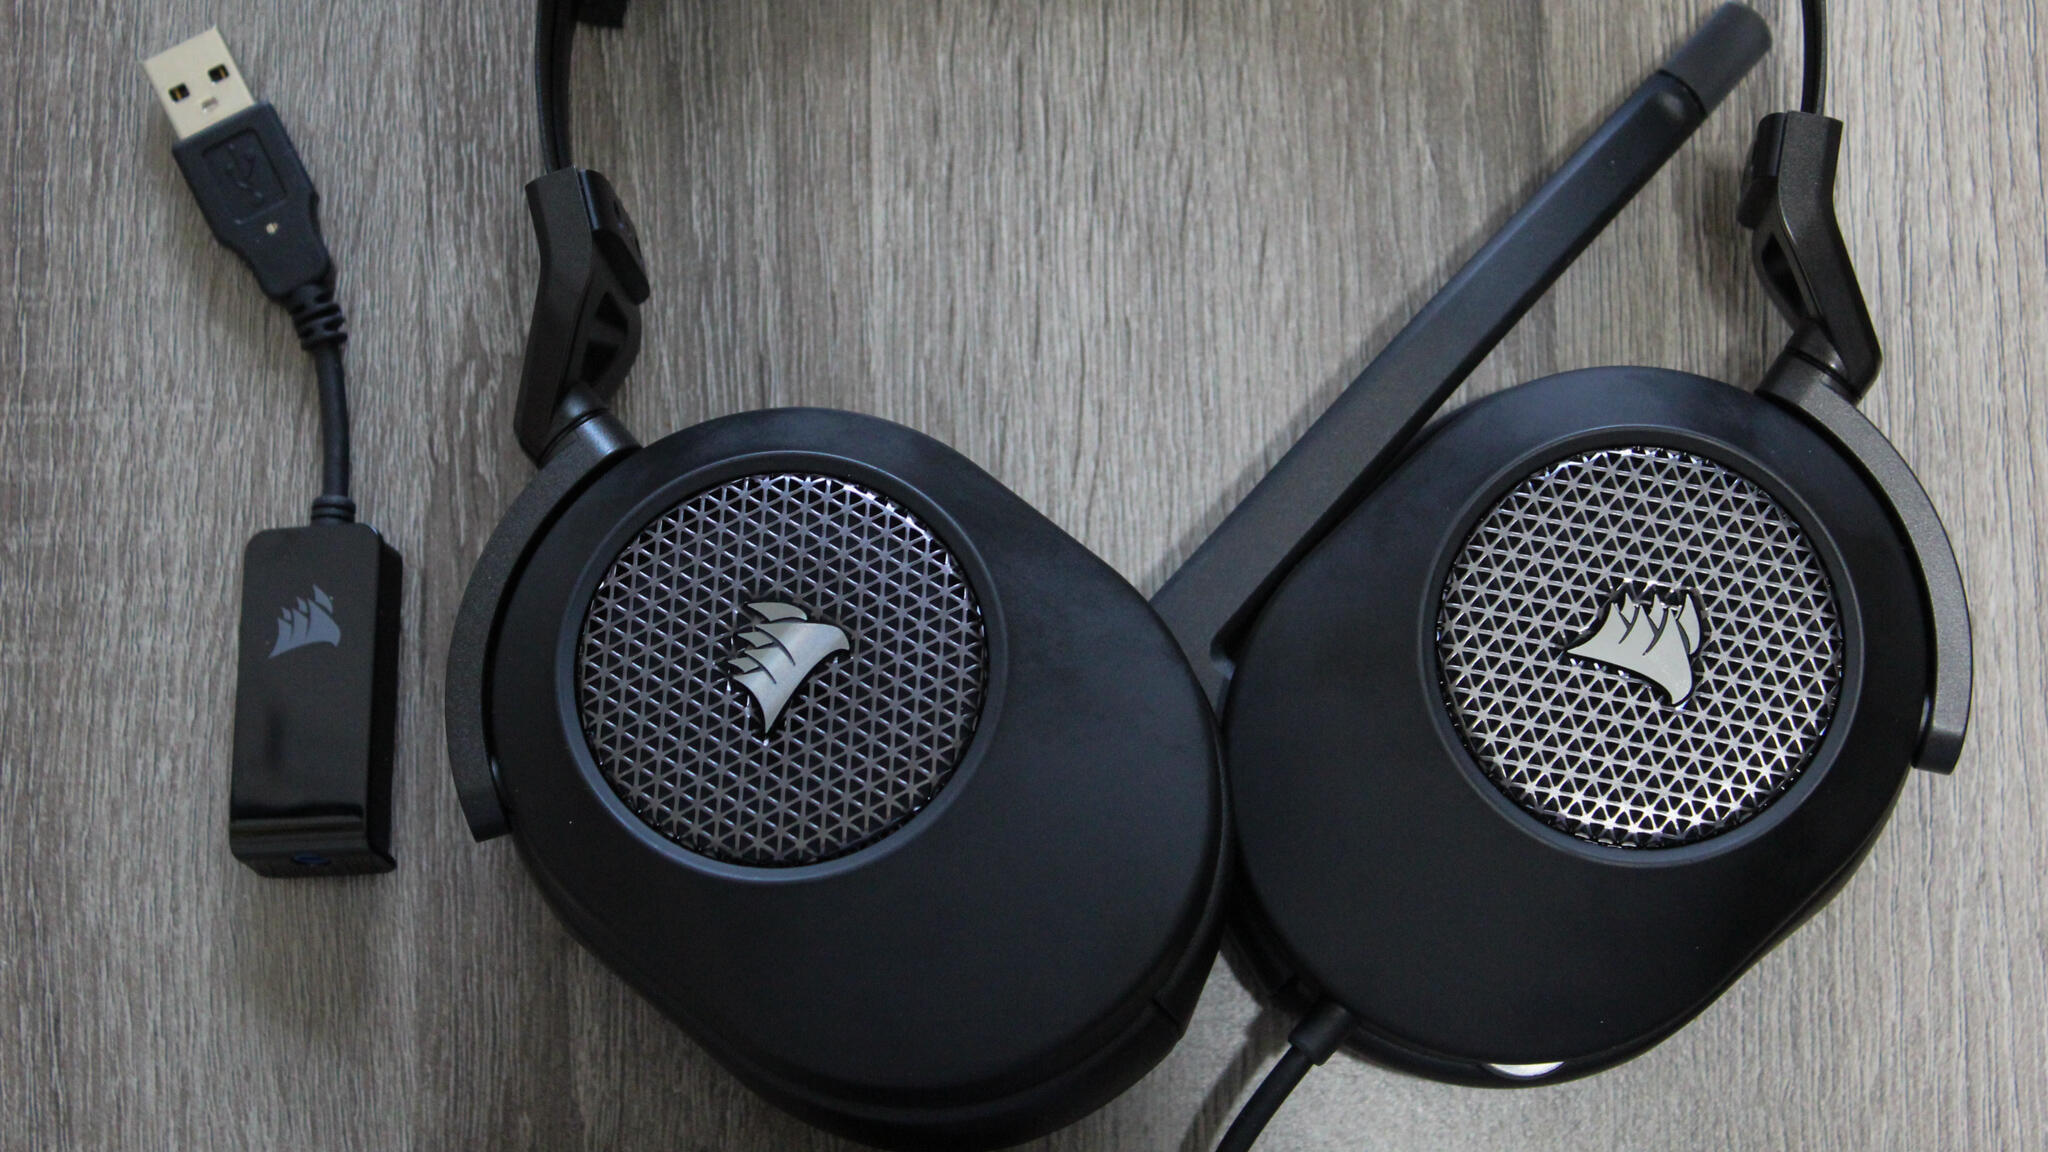 Corsair HS55 Stereo & HS65 Surround Gaming Headsets – New budget